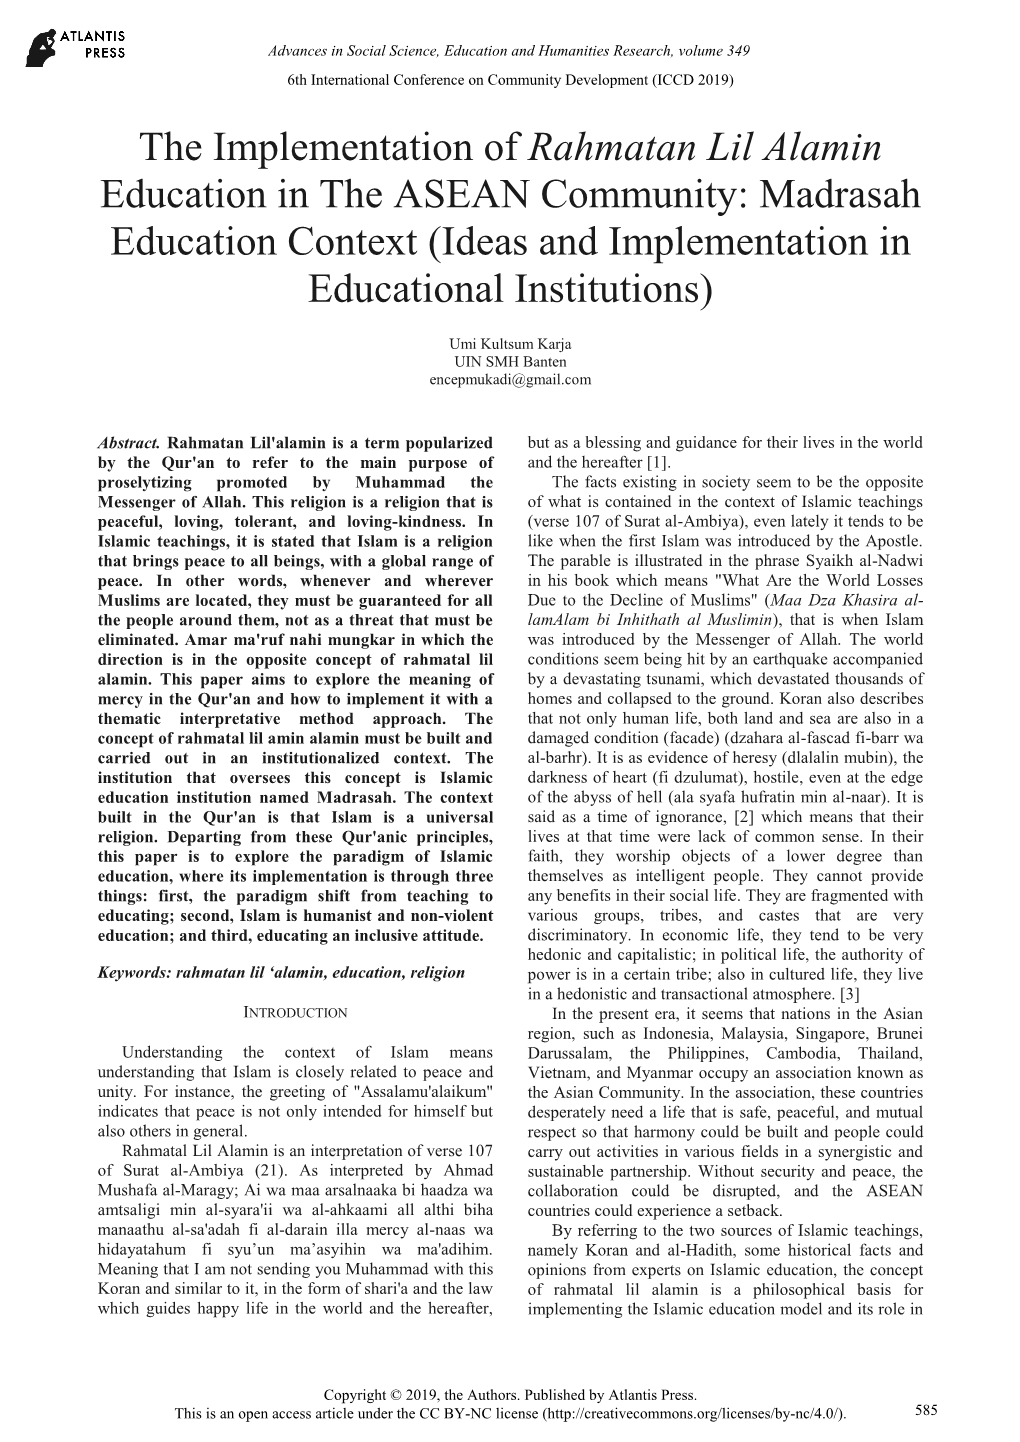 Rahmatan Lil Alamin Education in the ASEAN Community: Madrasah Education Context (Ideas and Implementation in Educational Institutions)